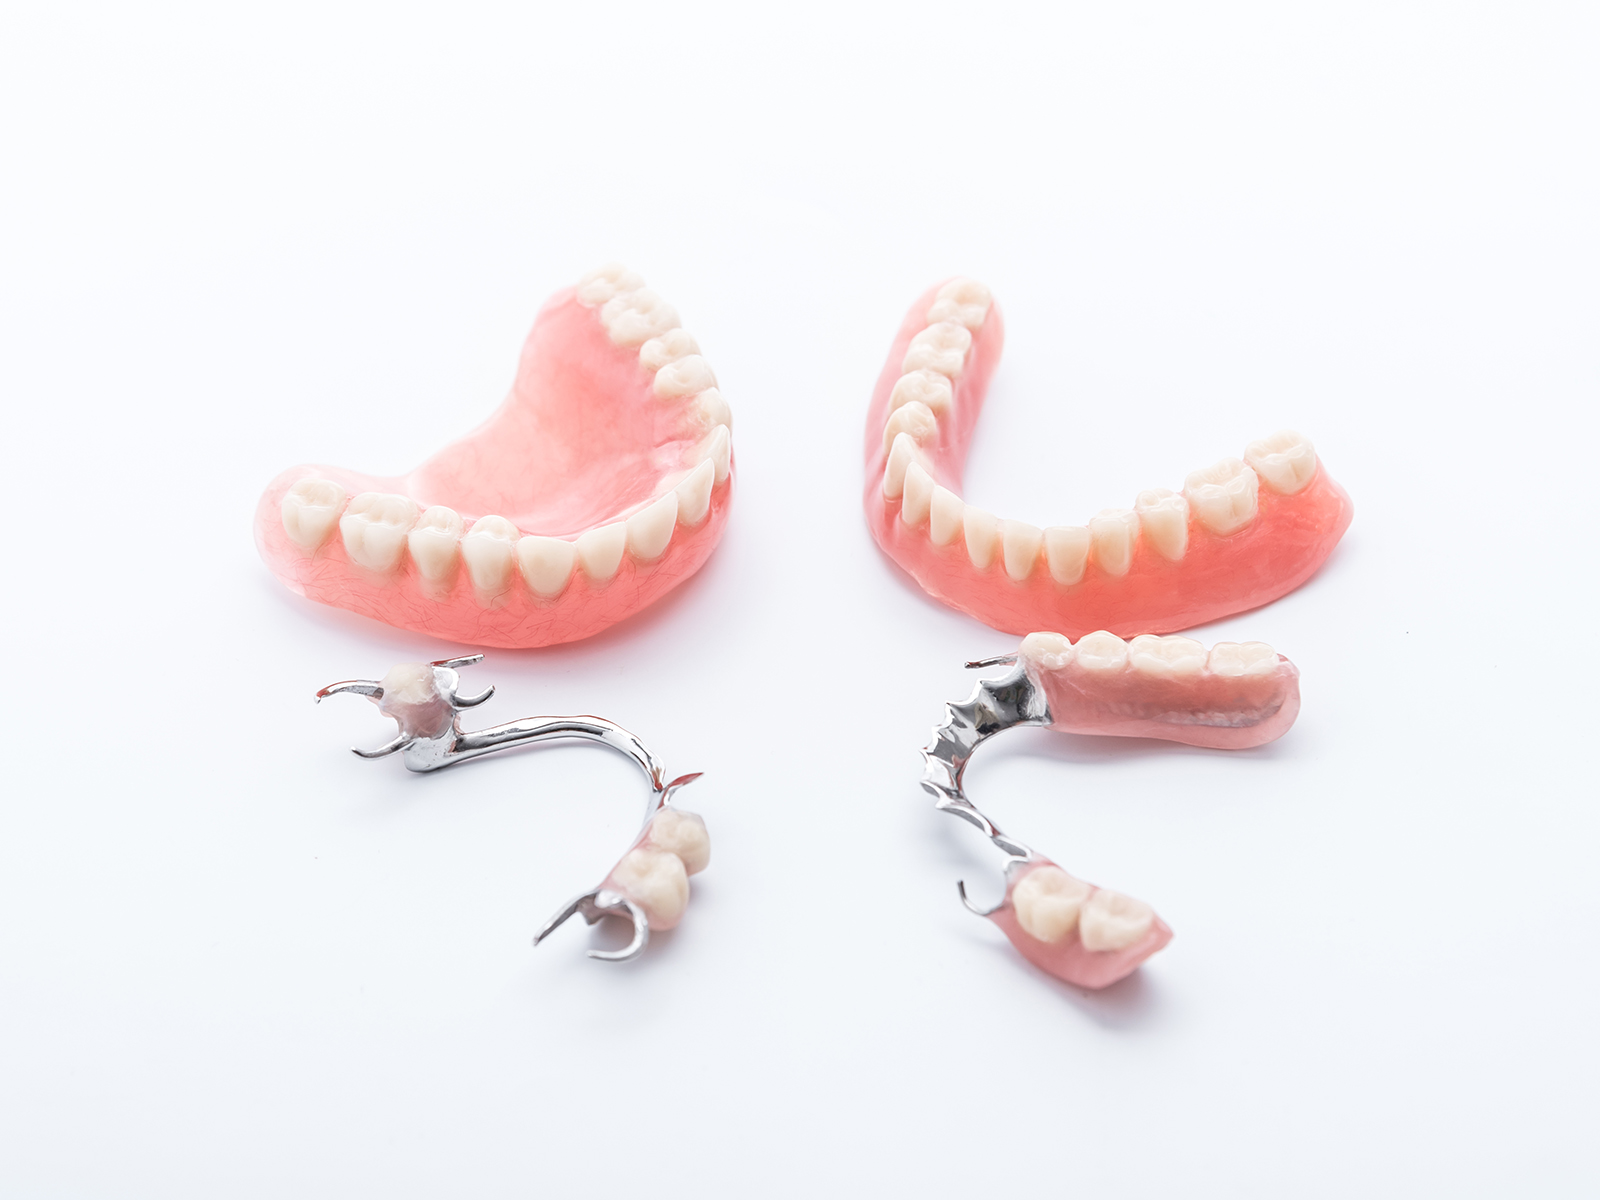 How many teeth can you lose before you need dentures?